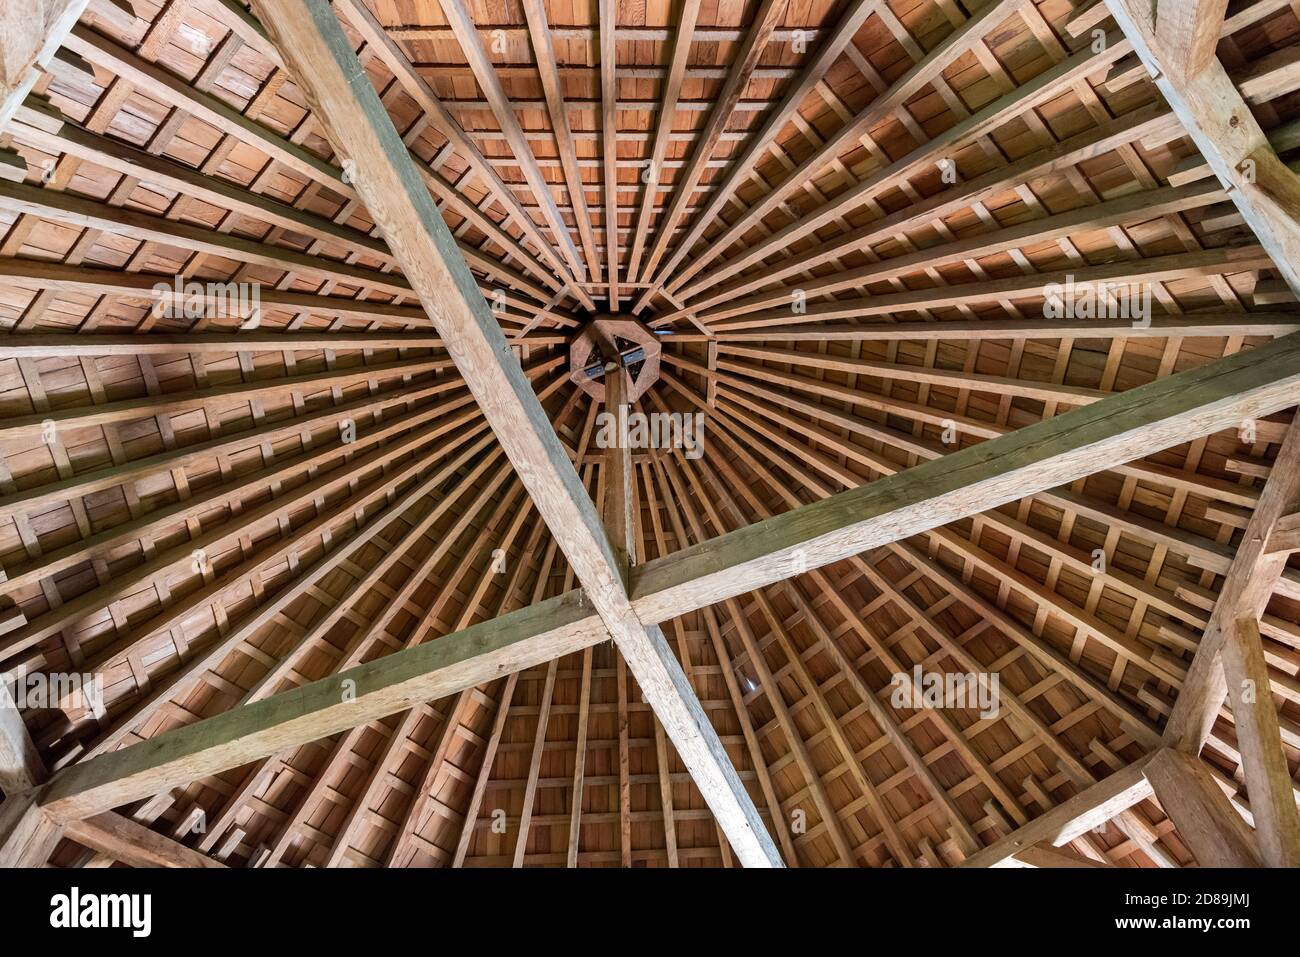 The intricate wooden roof of the replica of George Washington's 16-sided treading barn at the pioneer farm in Mount Vernon, Virginia Stock Photo